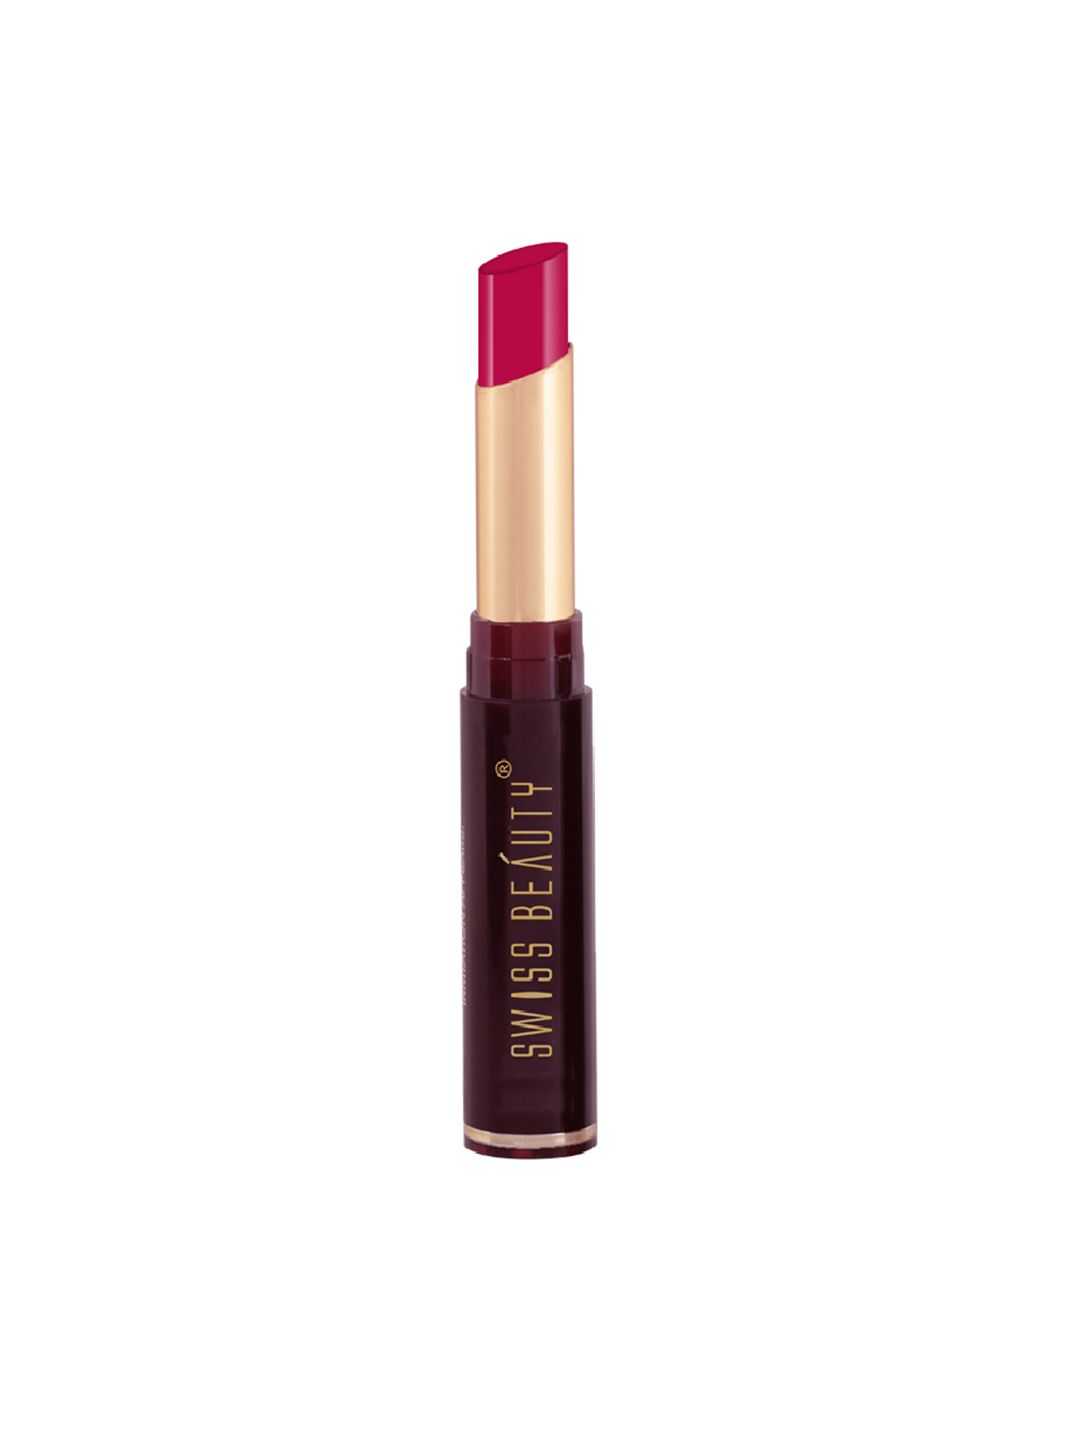 SWISS BEAUTY Non-Transfer Matte Lipstick 2 gm- Pink Up 15 Price in India